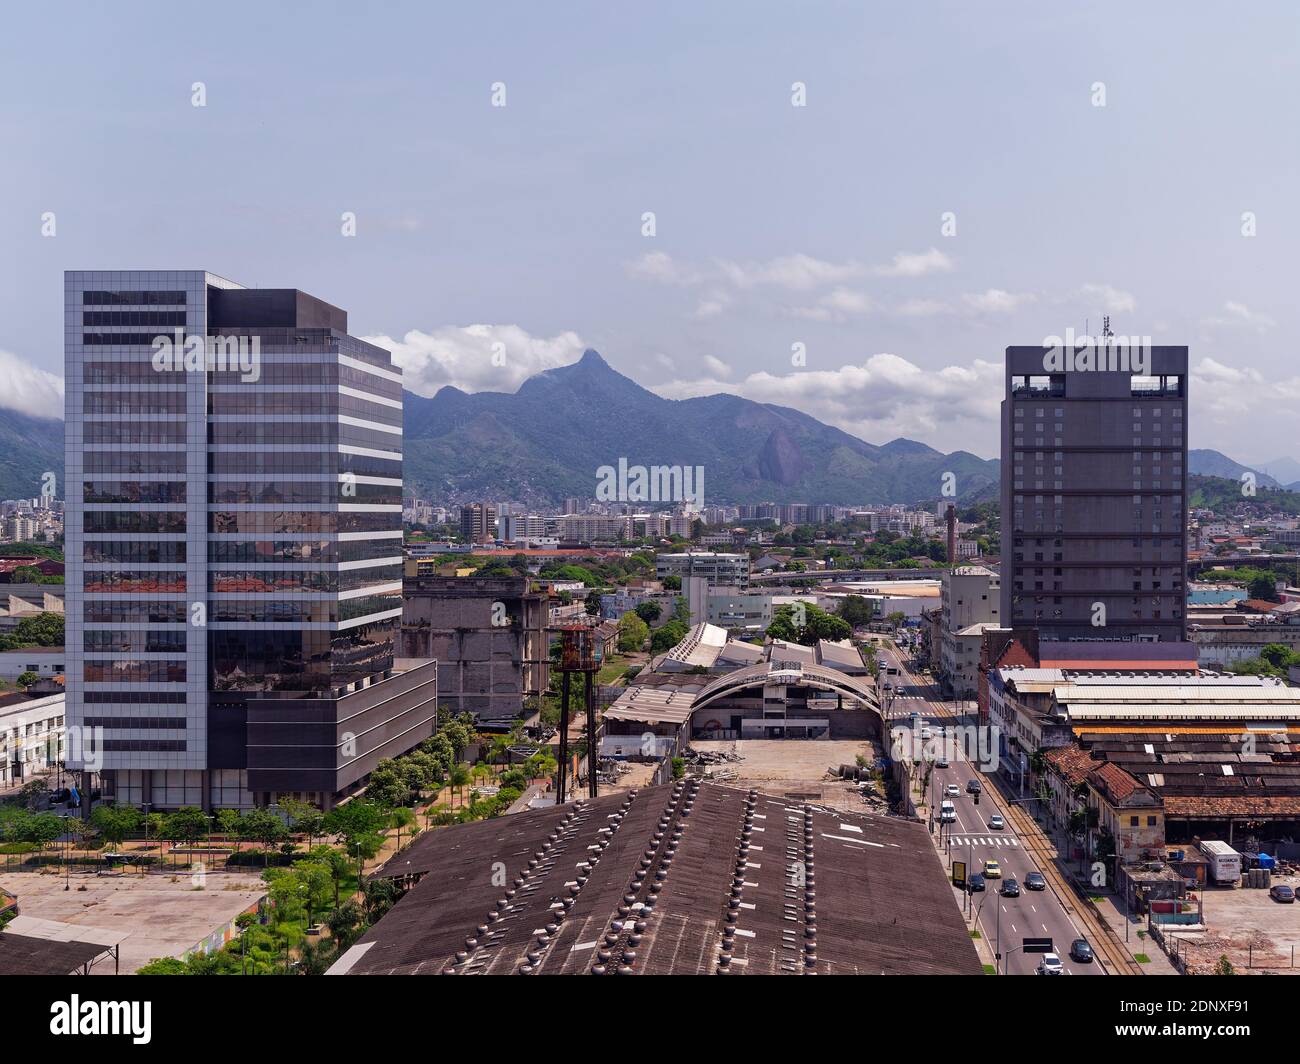 Looking over some of the Old Warehousing at the Old Port in Rio de Janeiro which is undergoing urban regeneration with modern buildings and Tower Bloc Stock Photo